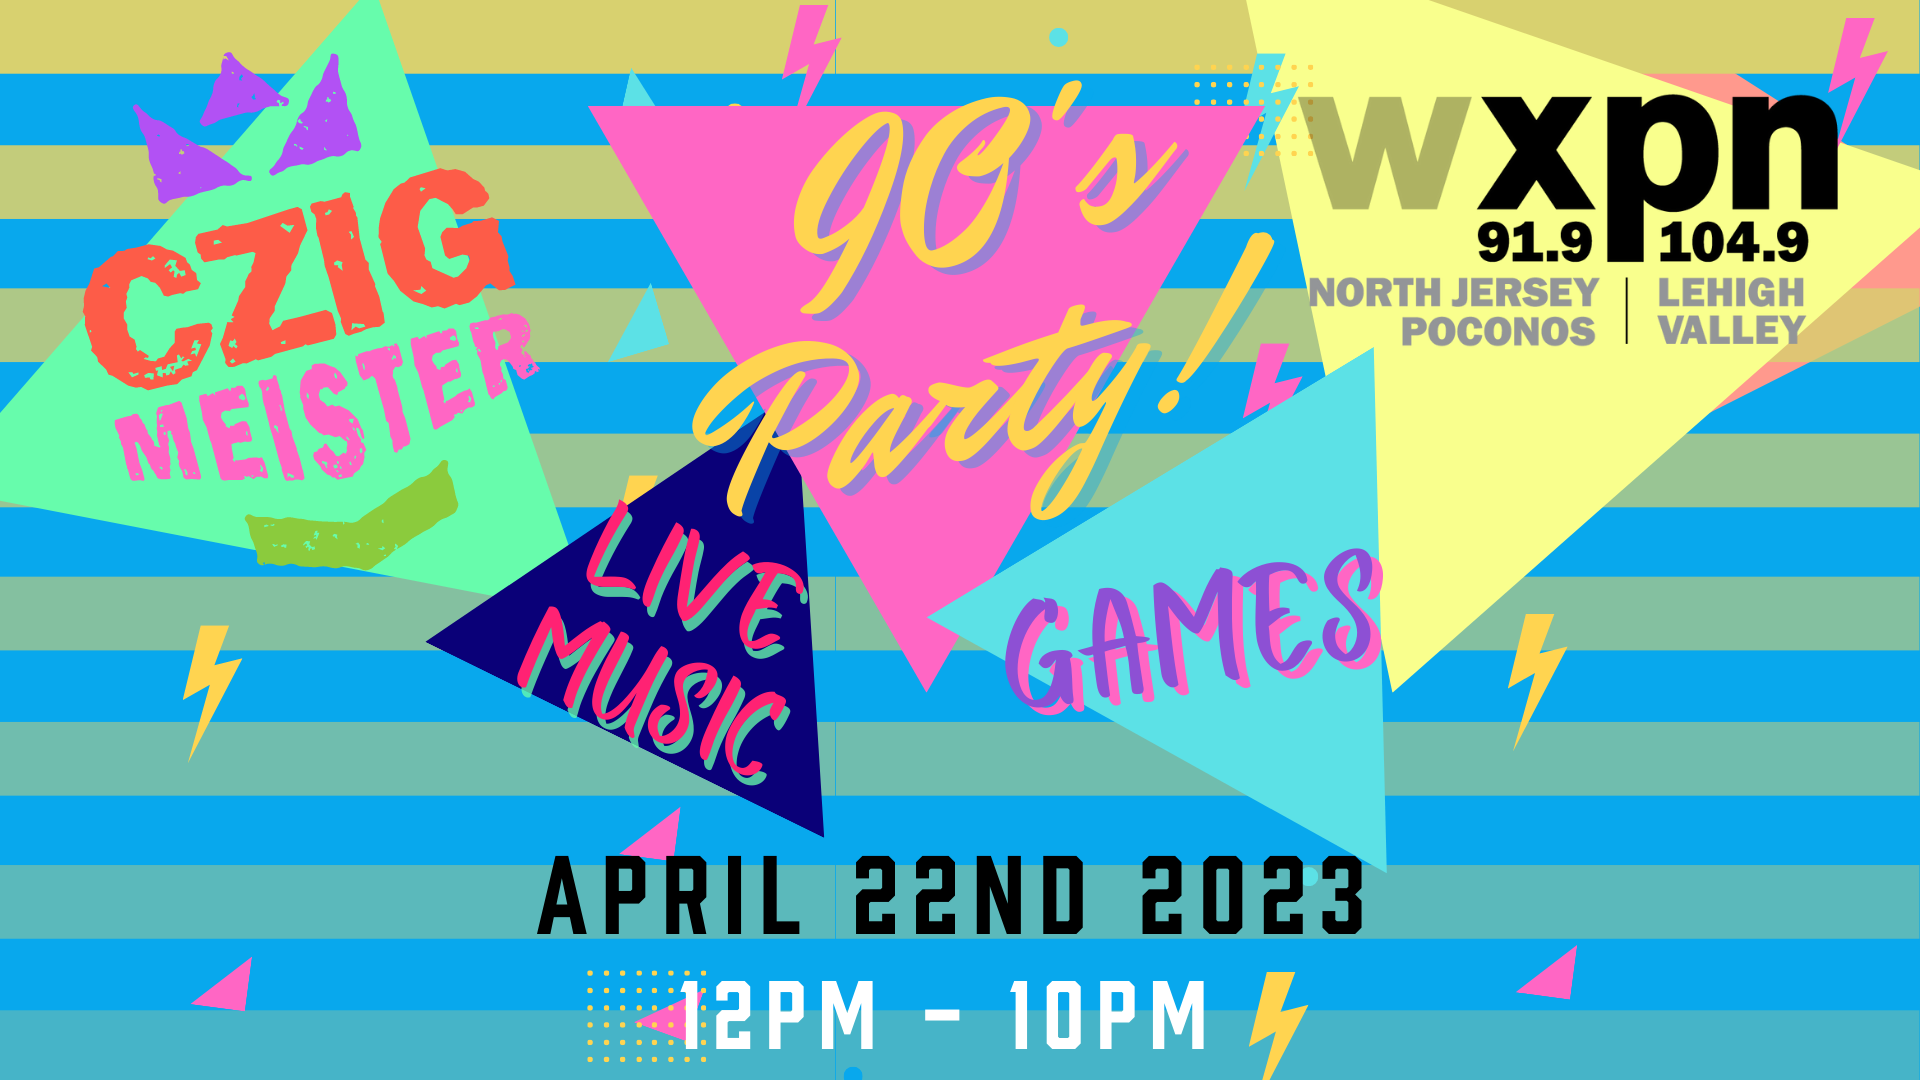 WXPN Welcomes Czig Meister's 90's Block Party on April 22nd